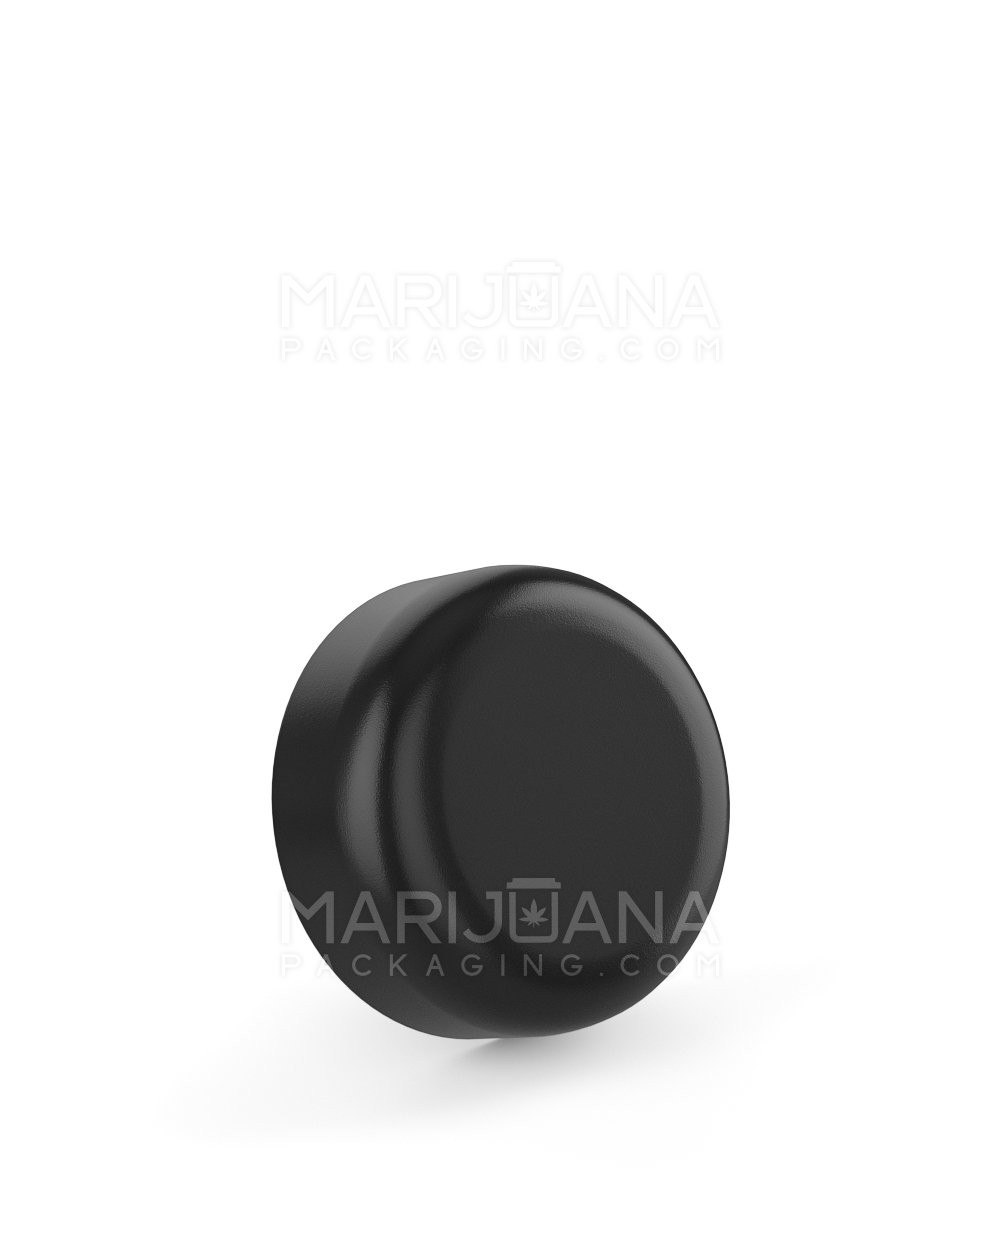 Child Resistant | Smooth Push Down & Turn Plastic Caps w/ Foam Liner | 32mm - Semi Gloss Black - 320 Count - 1